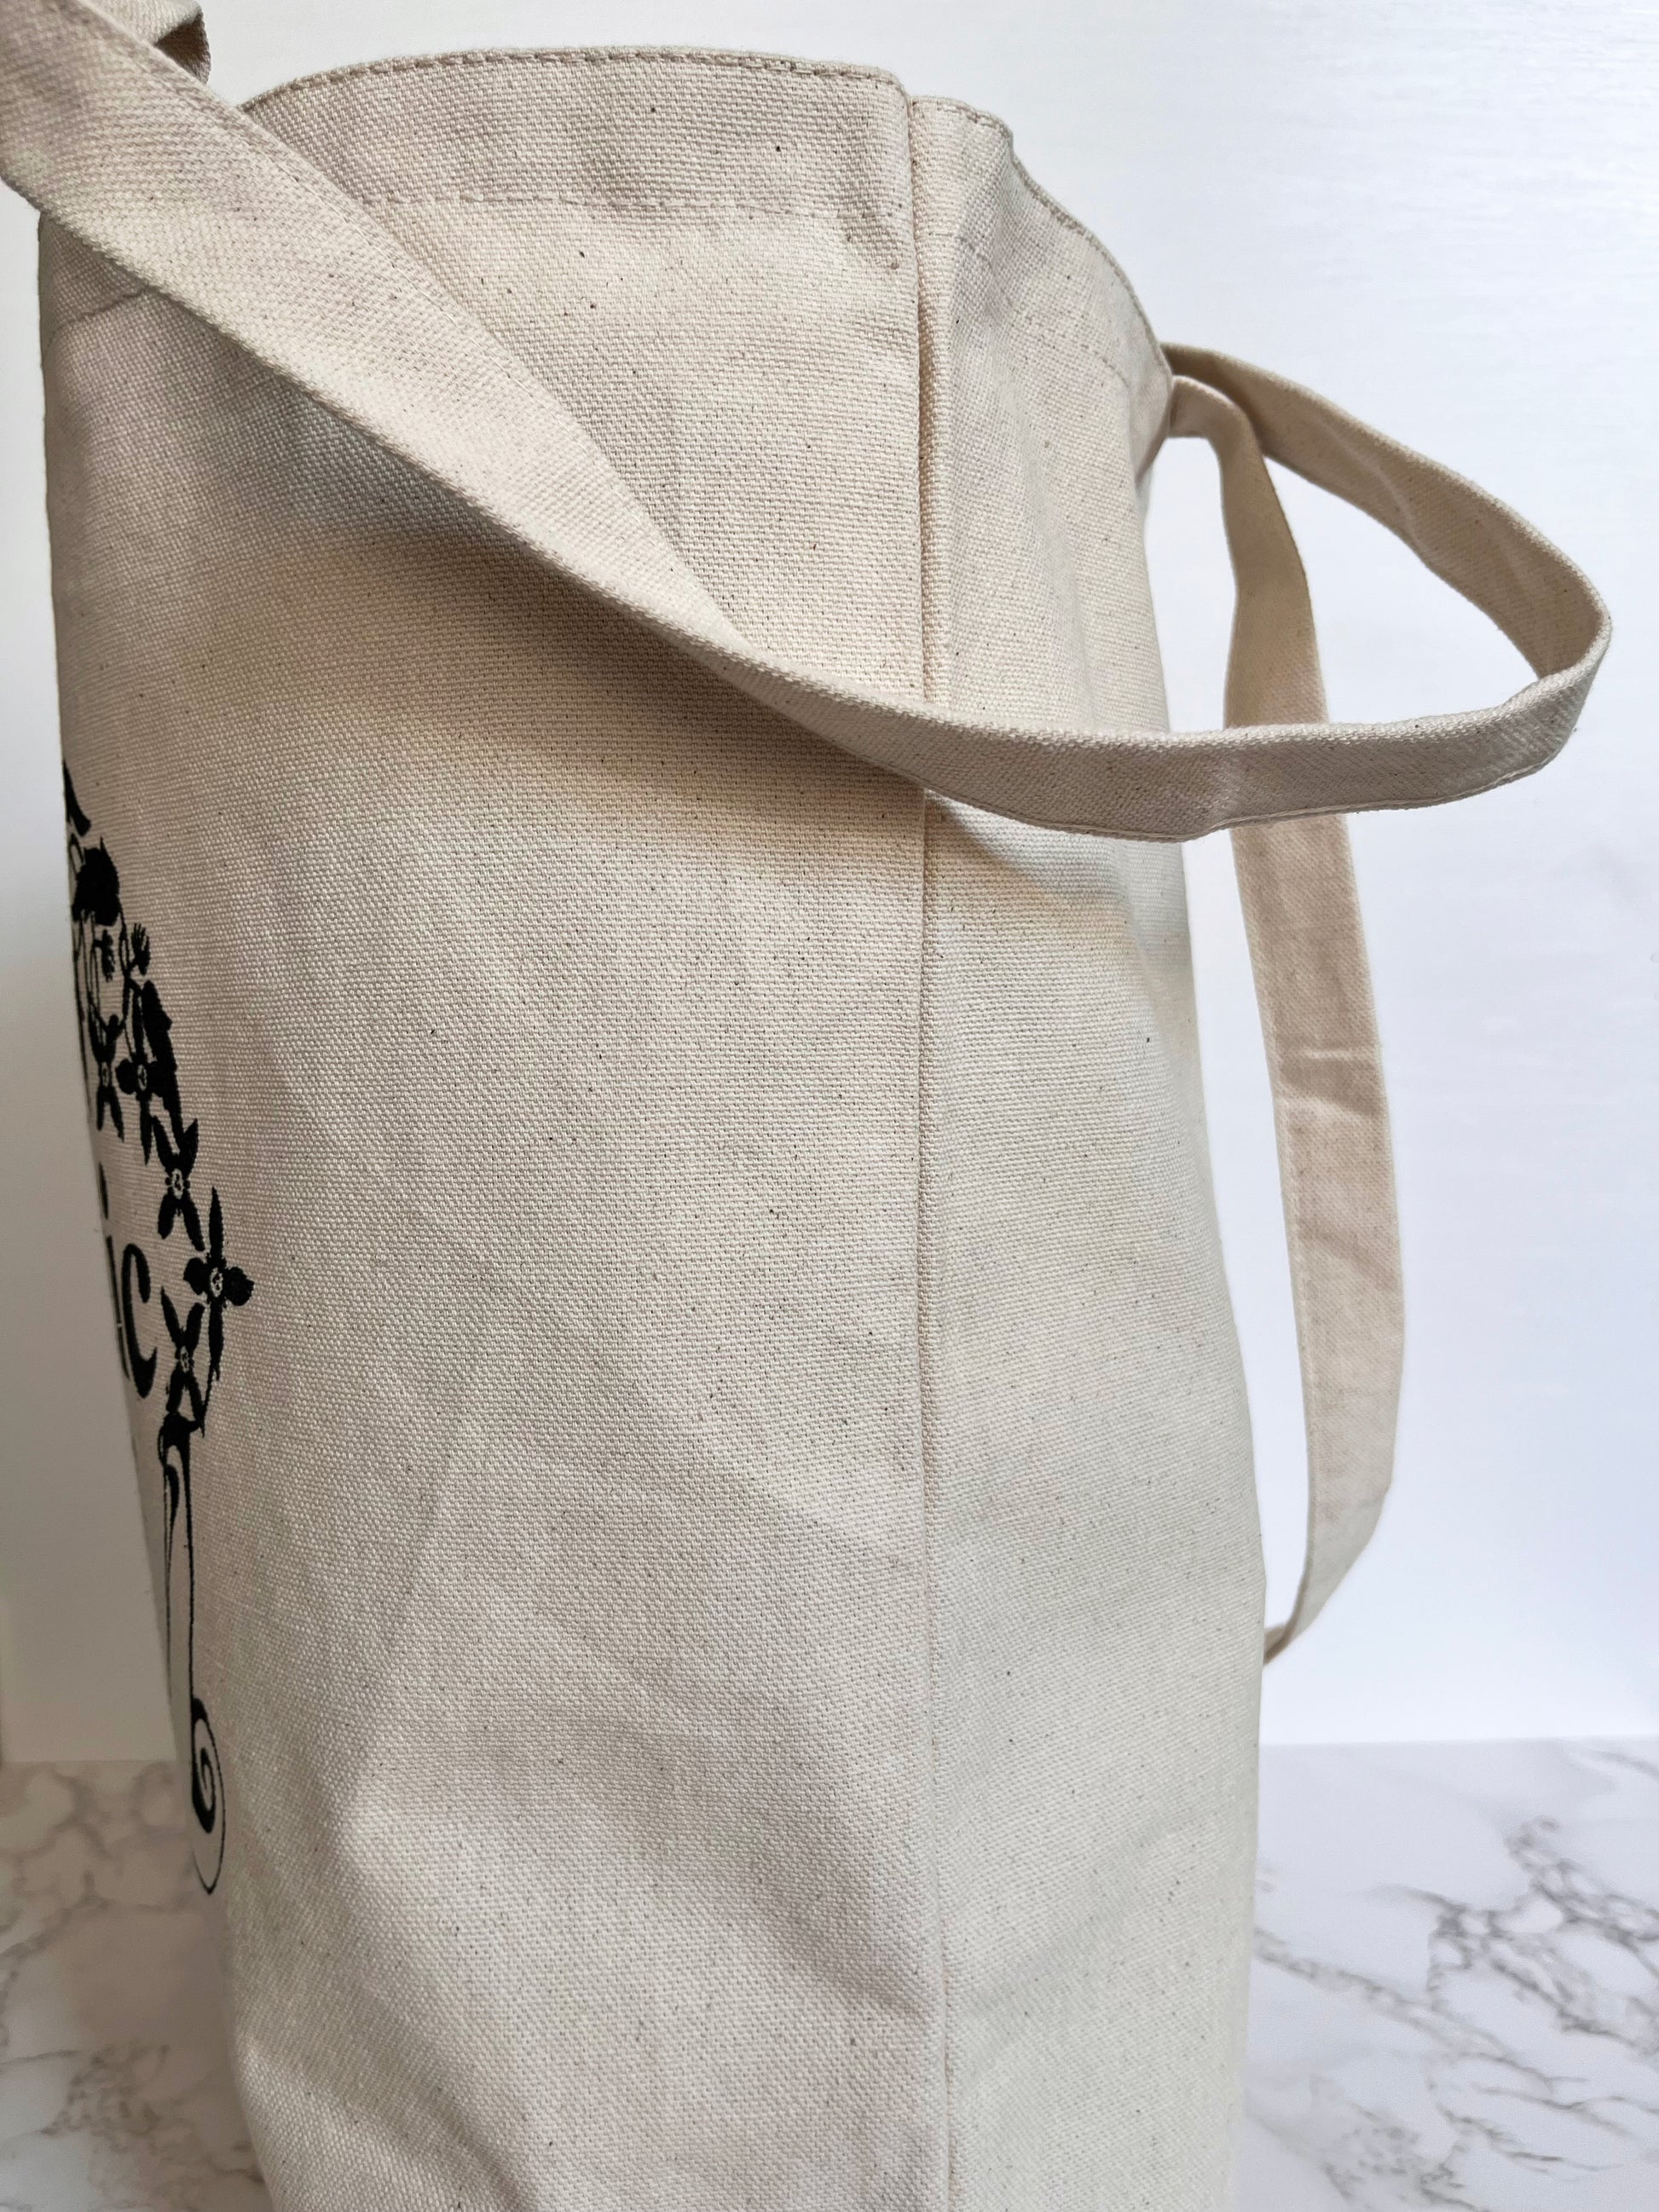 this is not a plastic bag earth friendly tote reusable grocery market purse beach carryall cute retro canvas heavy duty funny coin laundry screen print